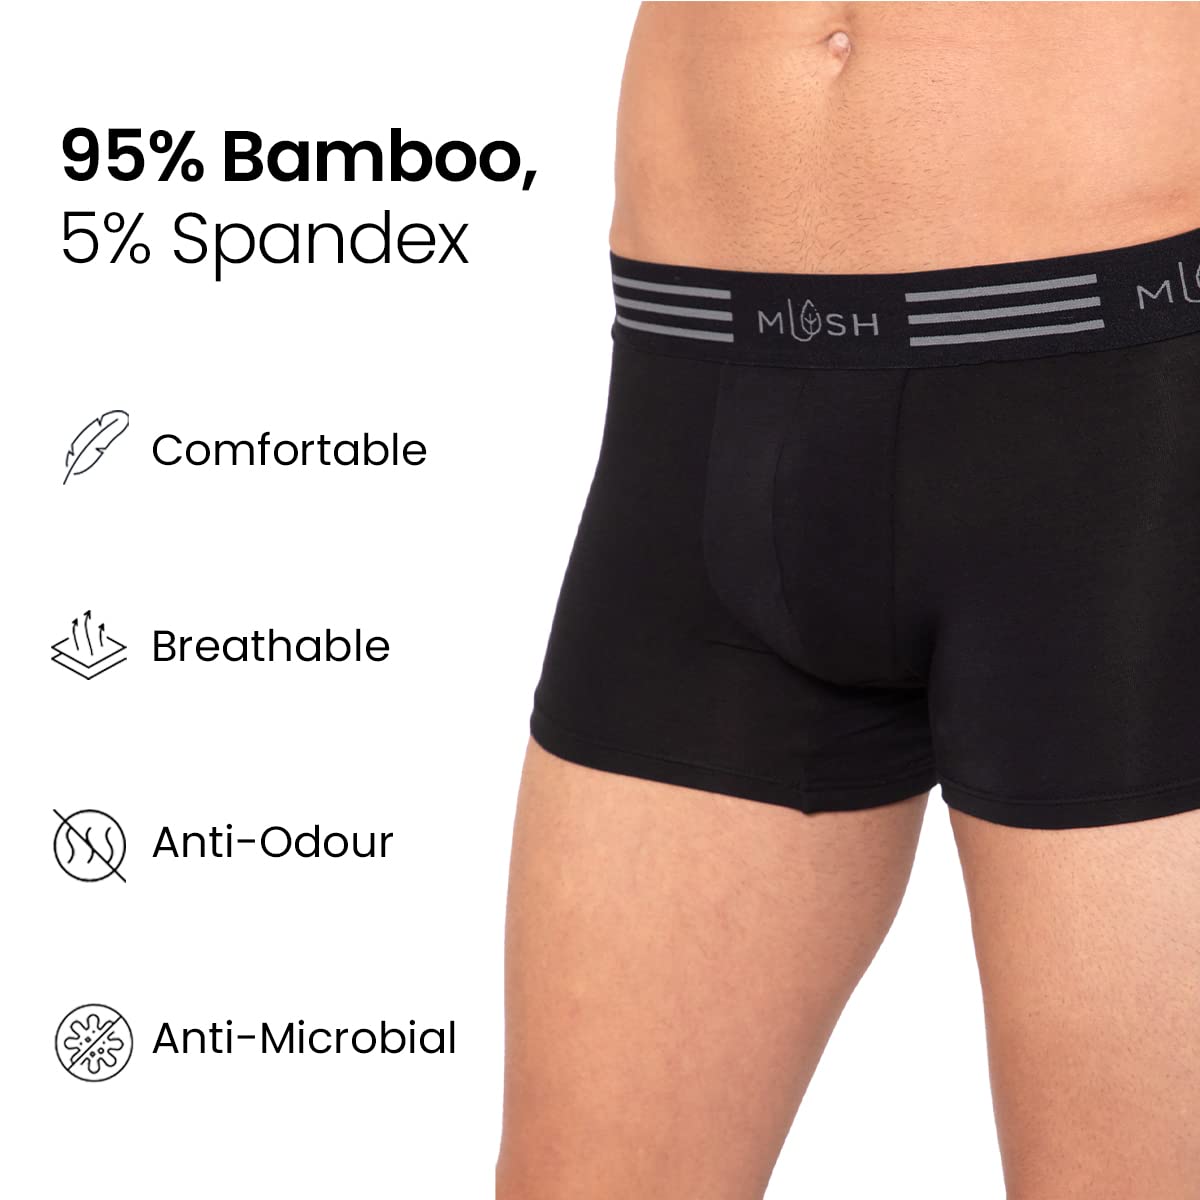 Mush Ultra Soft, Breathable, Feather Light Men's Bamboo Trunk || Naturally Anti-Odor and Anti-Microbial Bamboo Innerwear Pack of 2 (L, Melange Grey and Black)